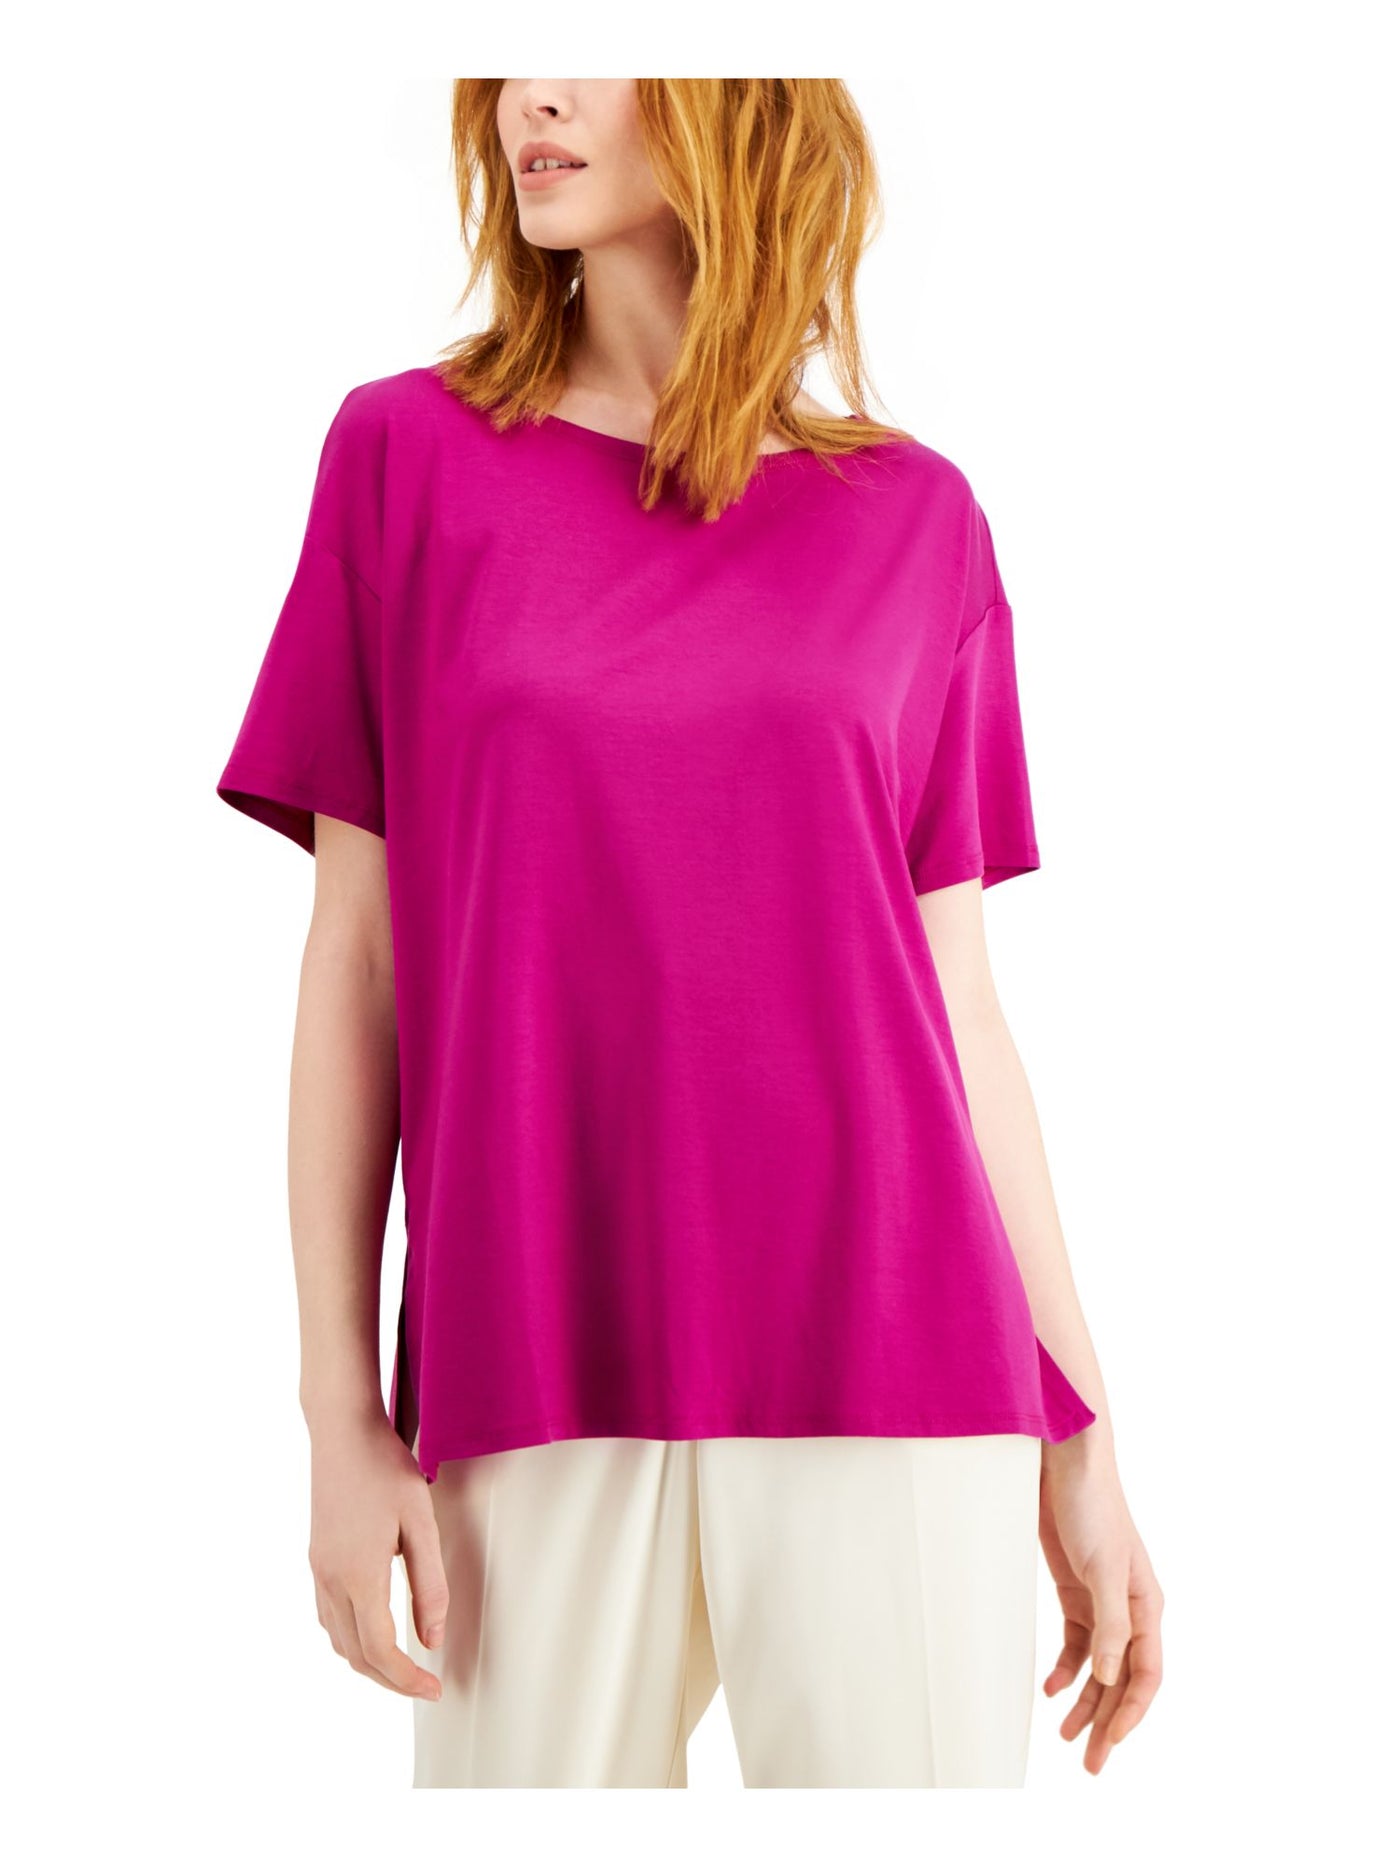 EILEEN FISHER Womens Pink Short Sleeve Boat Neck Top L